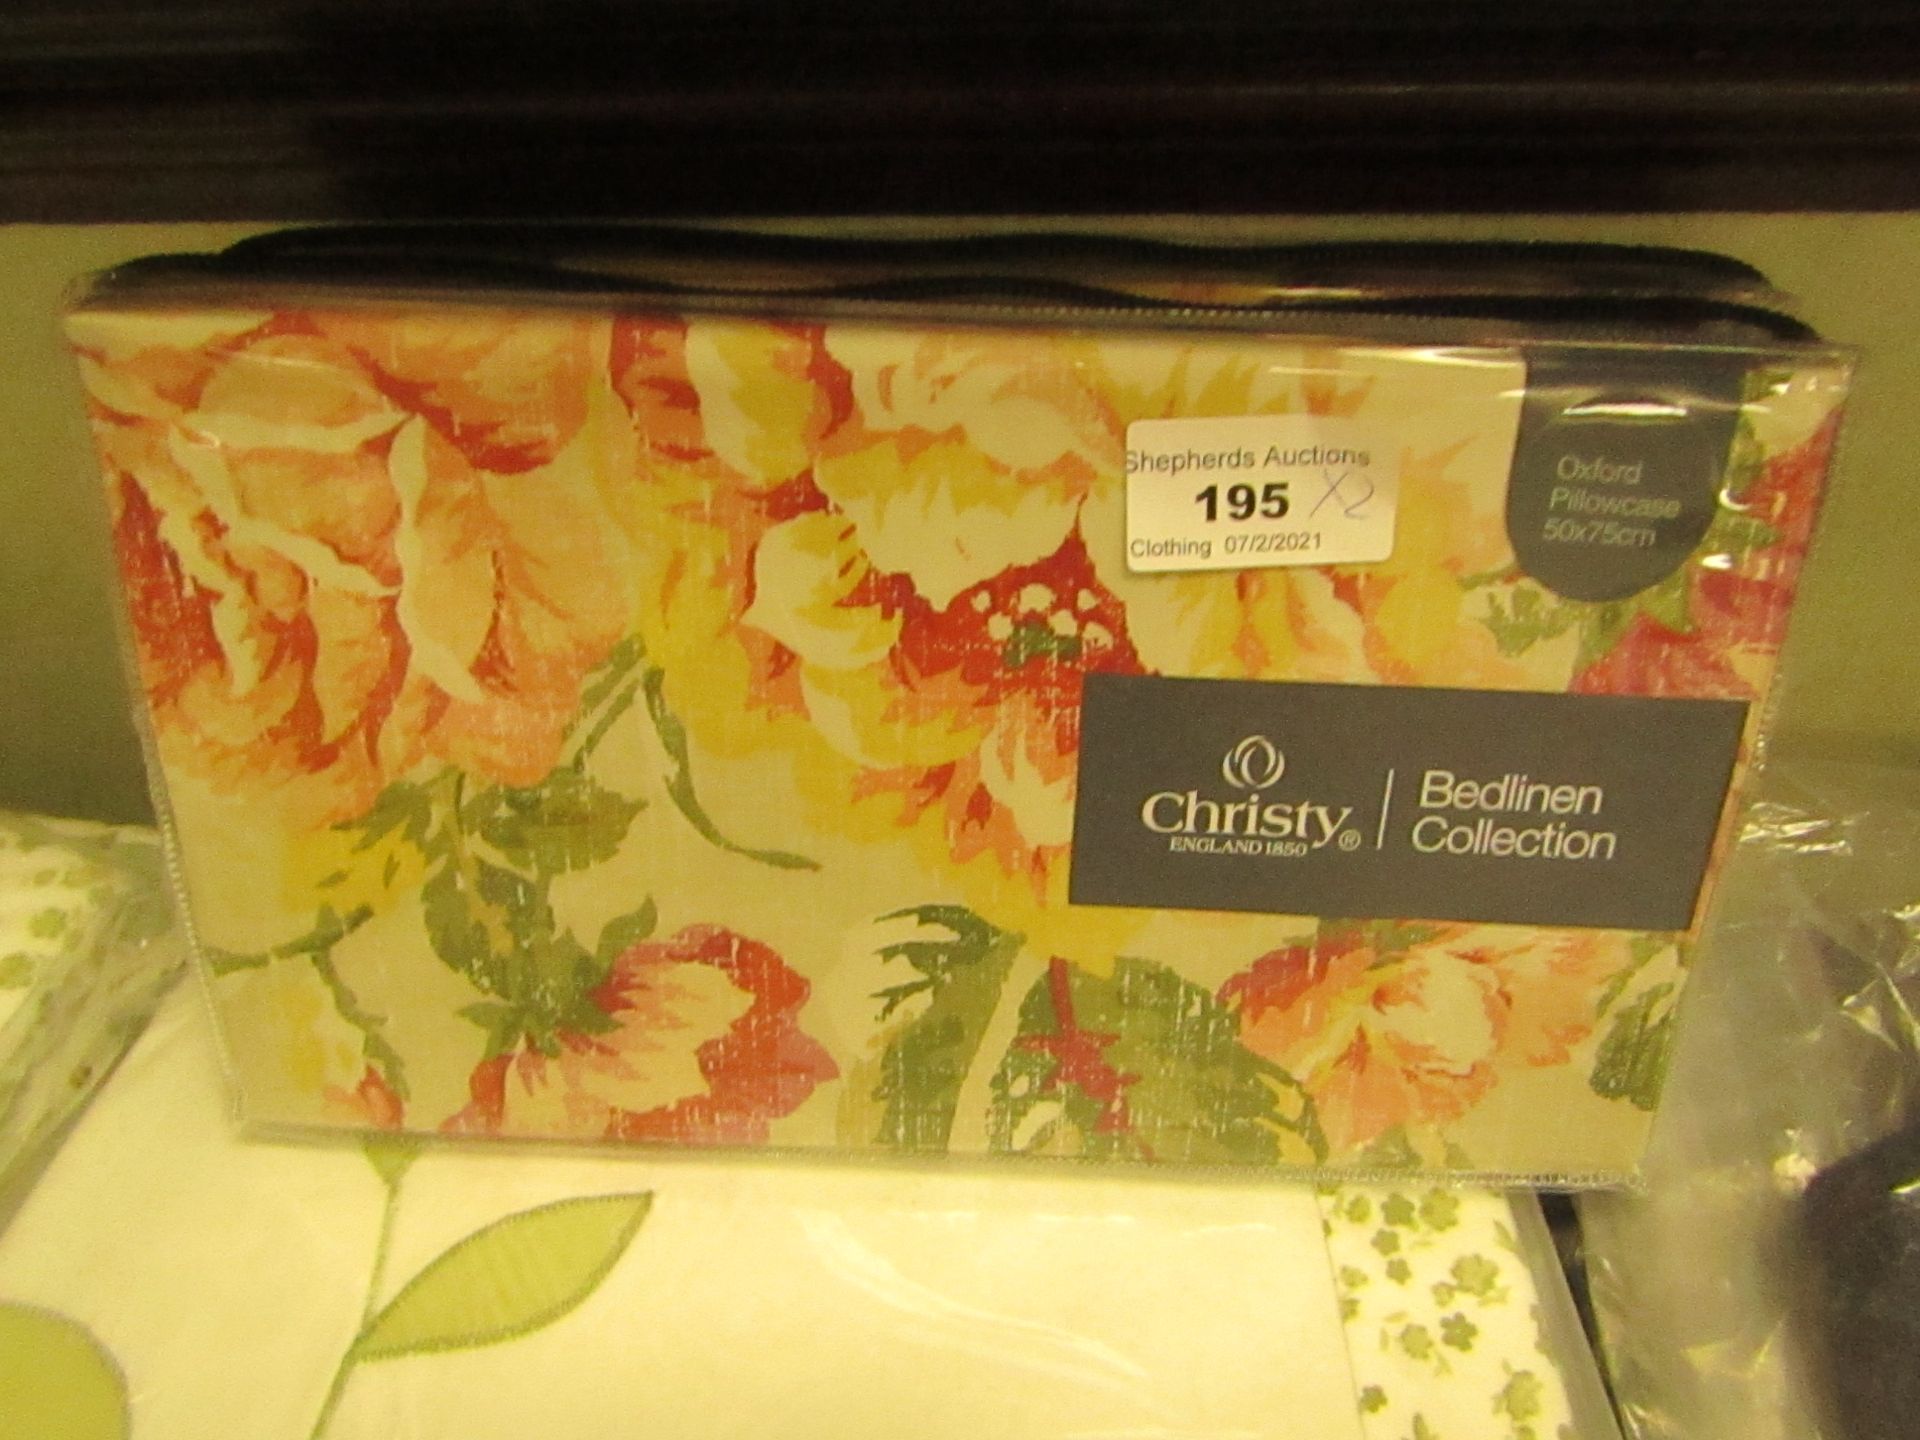 2 X Christy Oxford Pillowcases 50 X 70 New & Packaged